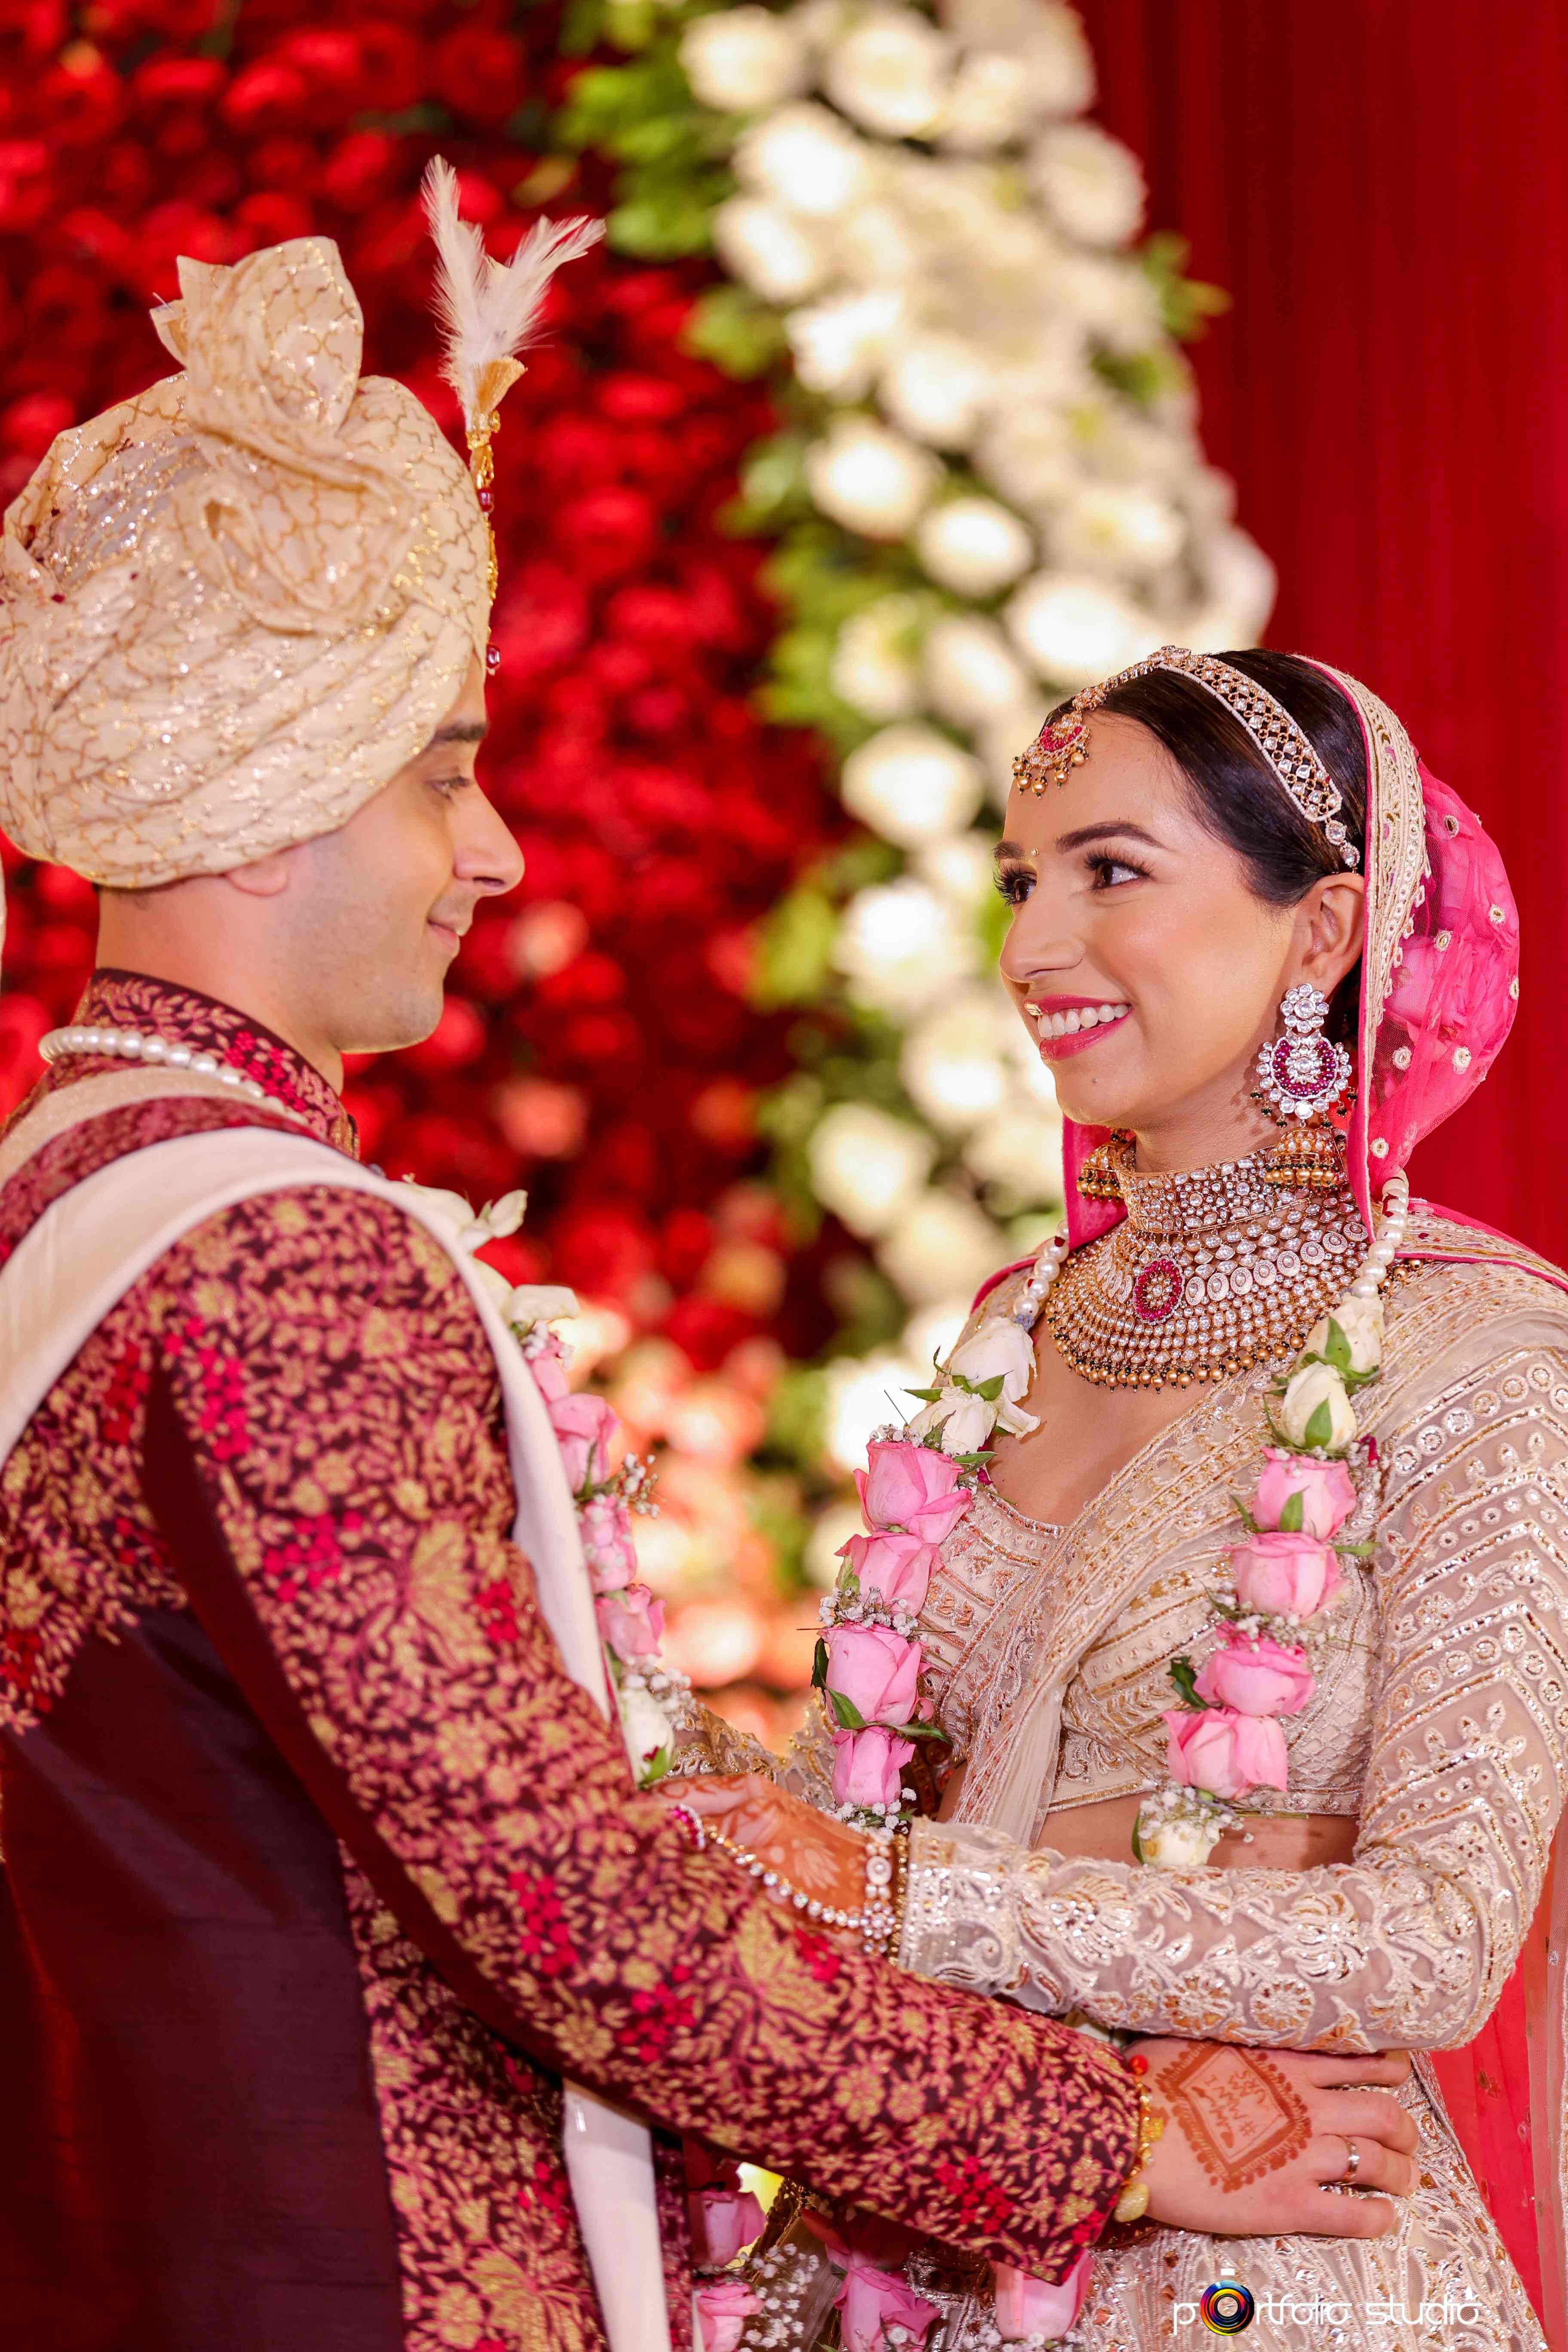 Urvashi & Manav’s Wedding Pictures Are So Surreal!